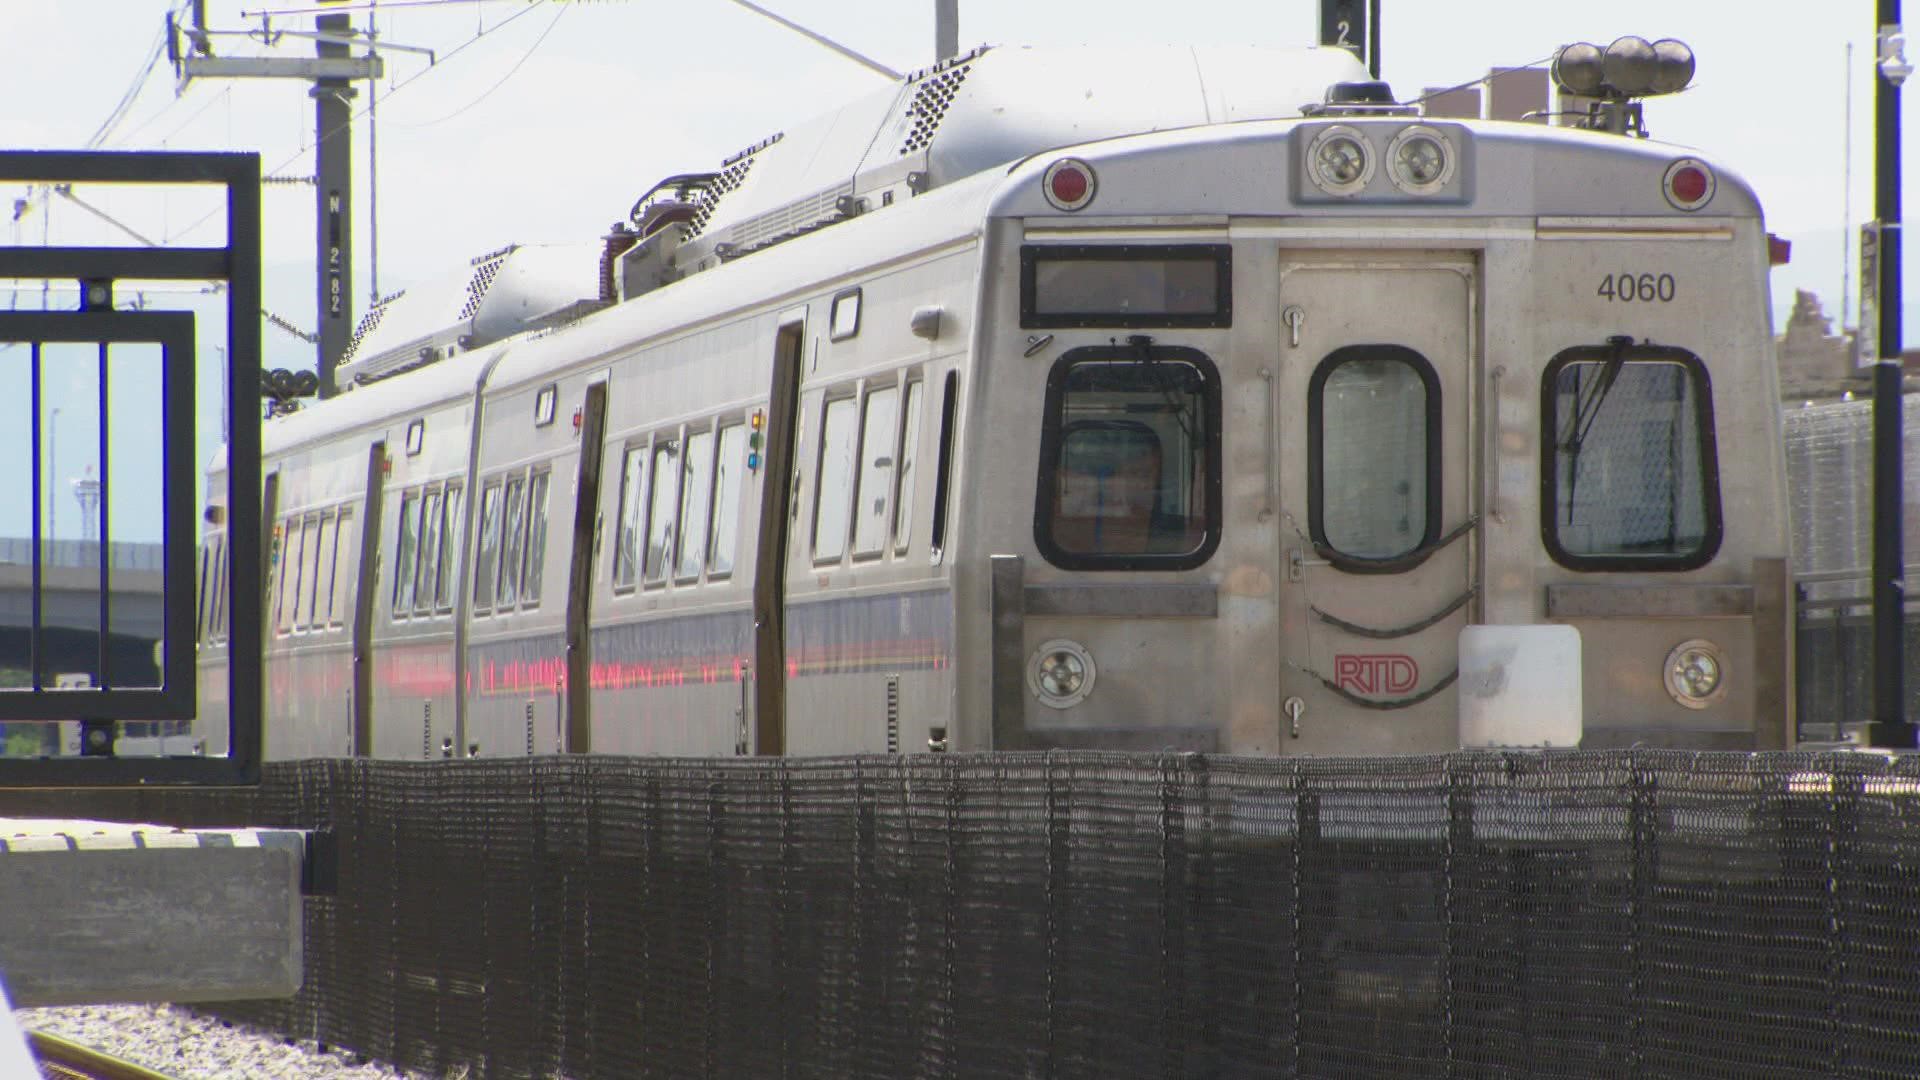 12 people were evacuated from two trains, according to RTD.